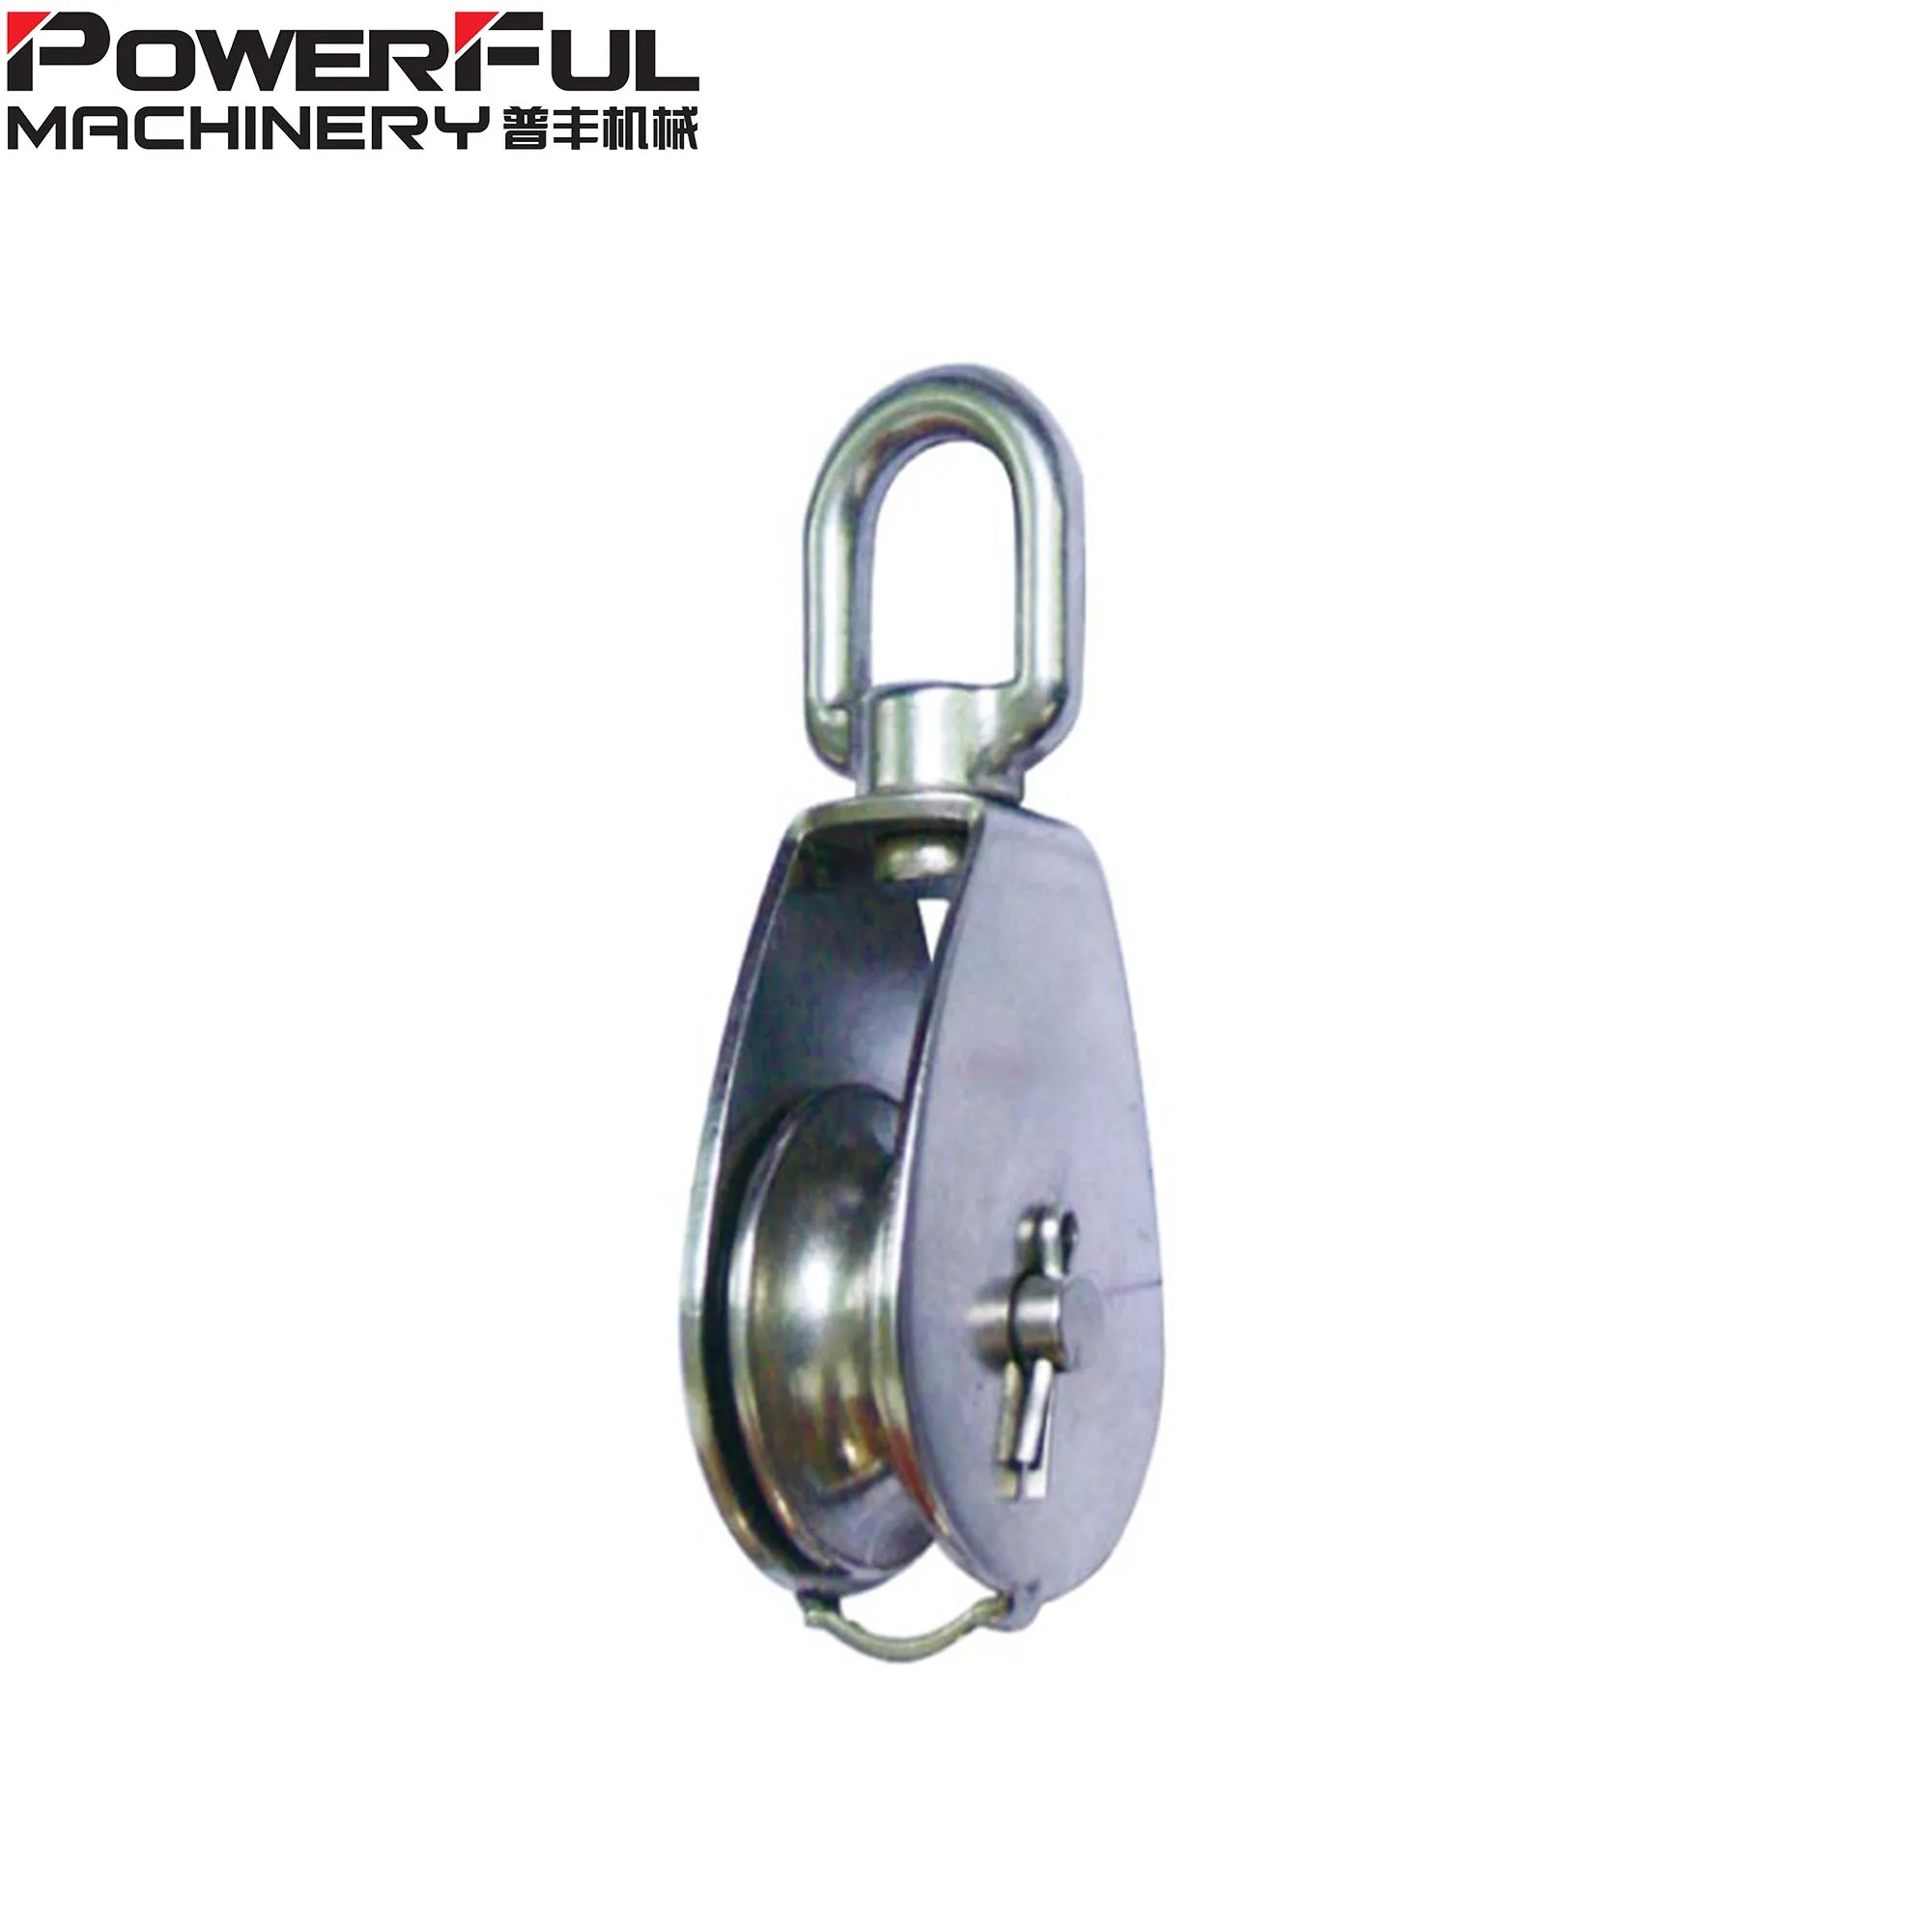 Wire Rope Hanging Wire Towing Wheel 2Pcs Spring Snap Hook 2Pcs 304 Stainless Steel M15 Single Pulley Block 2pcs Aluminum Crimping Loop Sleeves with 1pcs 4mm X 30m Polyester Rope 